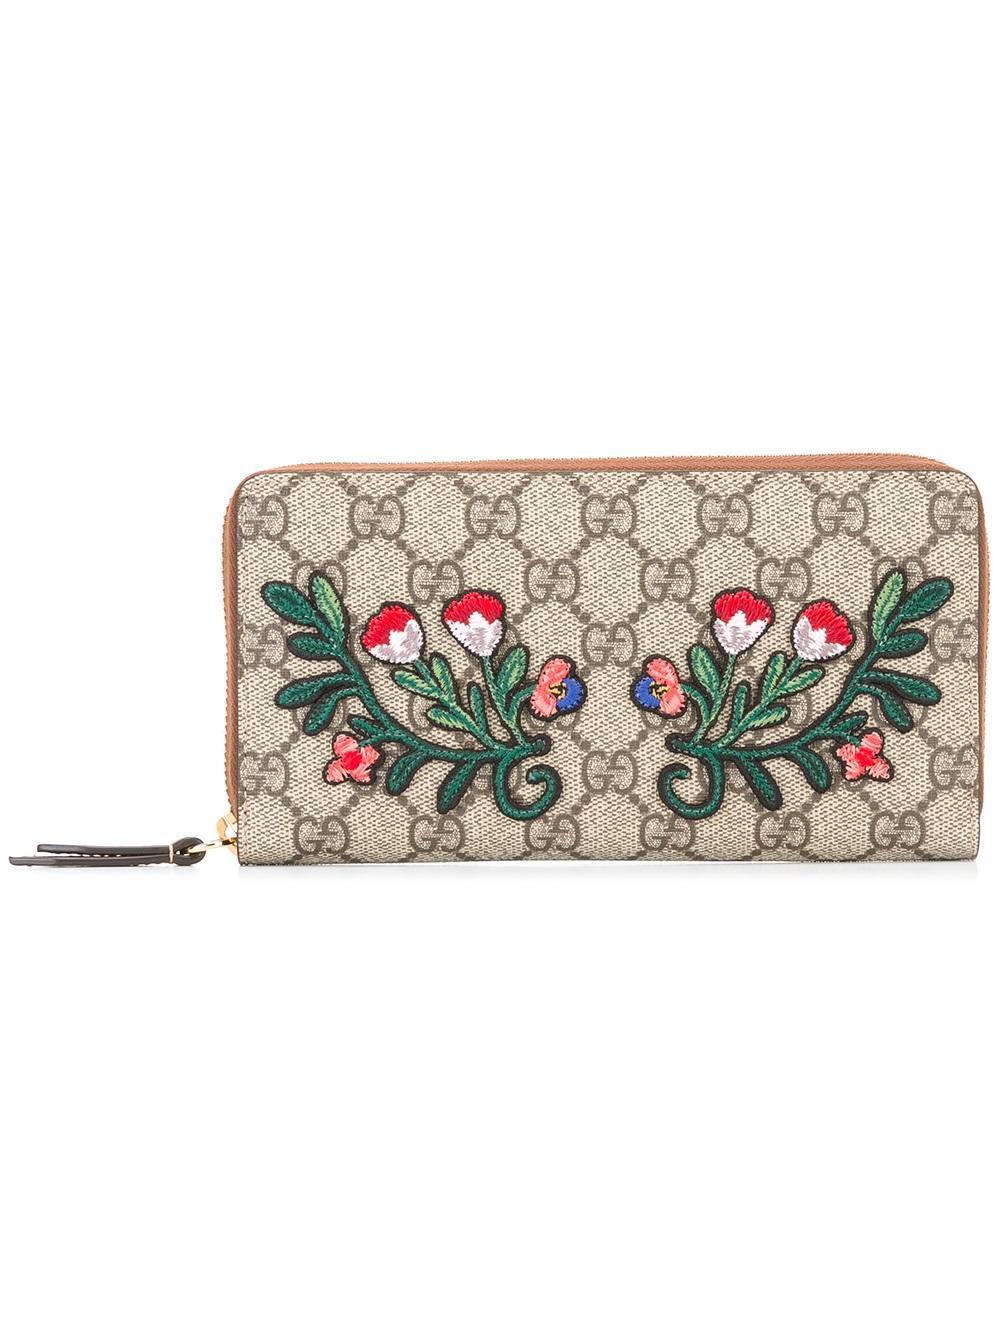 Gucci Leather Gg Supreme Floral Wallet in Brown - Lyst